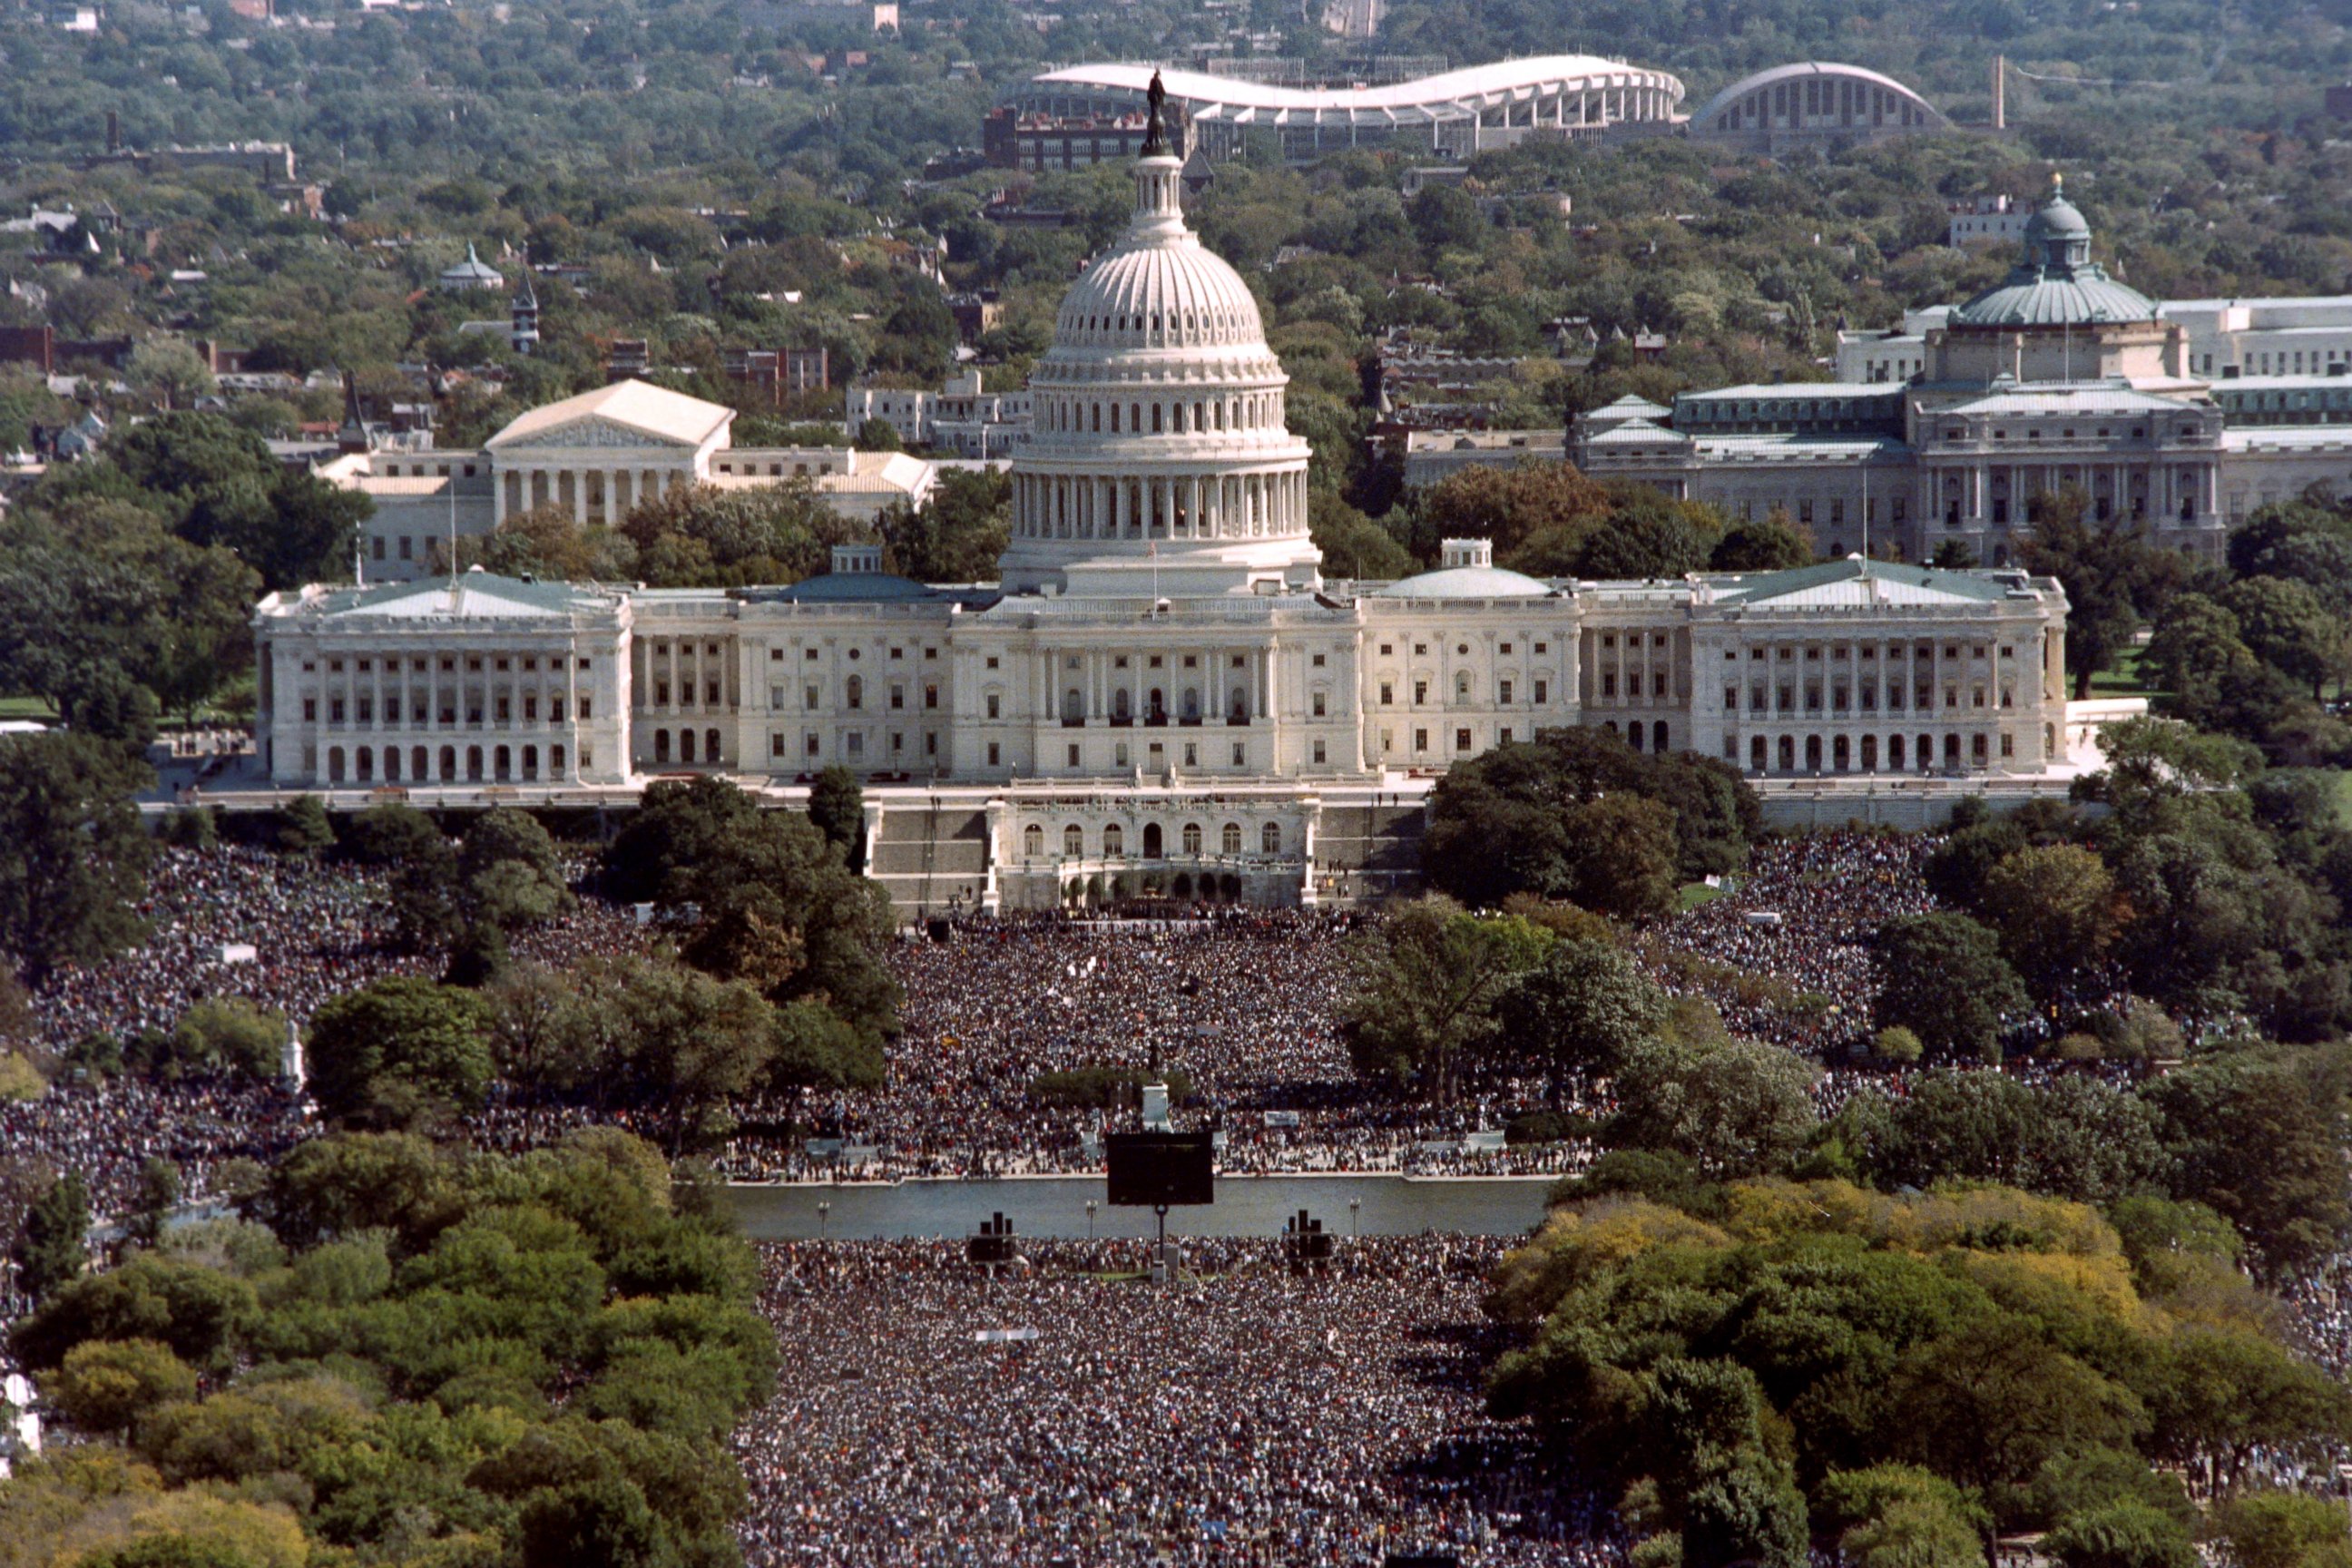 PHOTO: This photograph taken from the top of the Washington Monument shows thousands of people on the Mall in front of the US Capitol during the 'Million Man March' in Washington D.C., on October 16, 1995. 